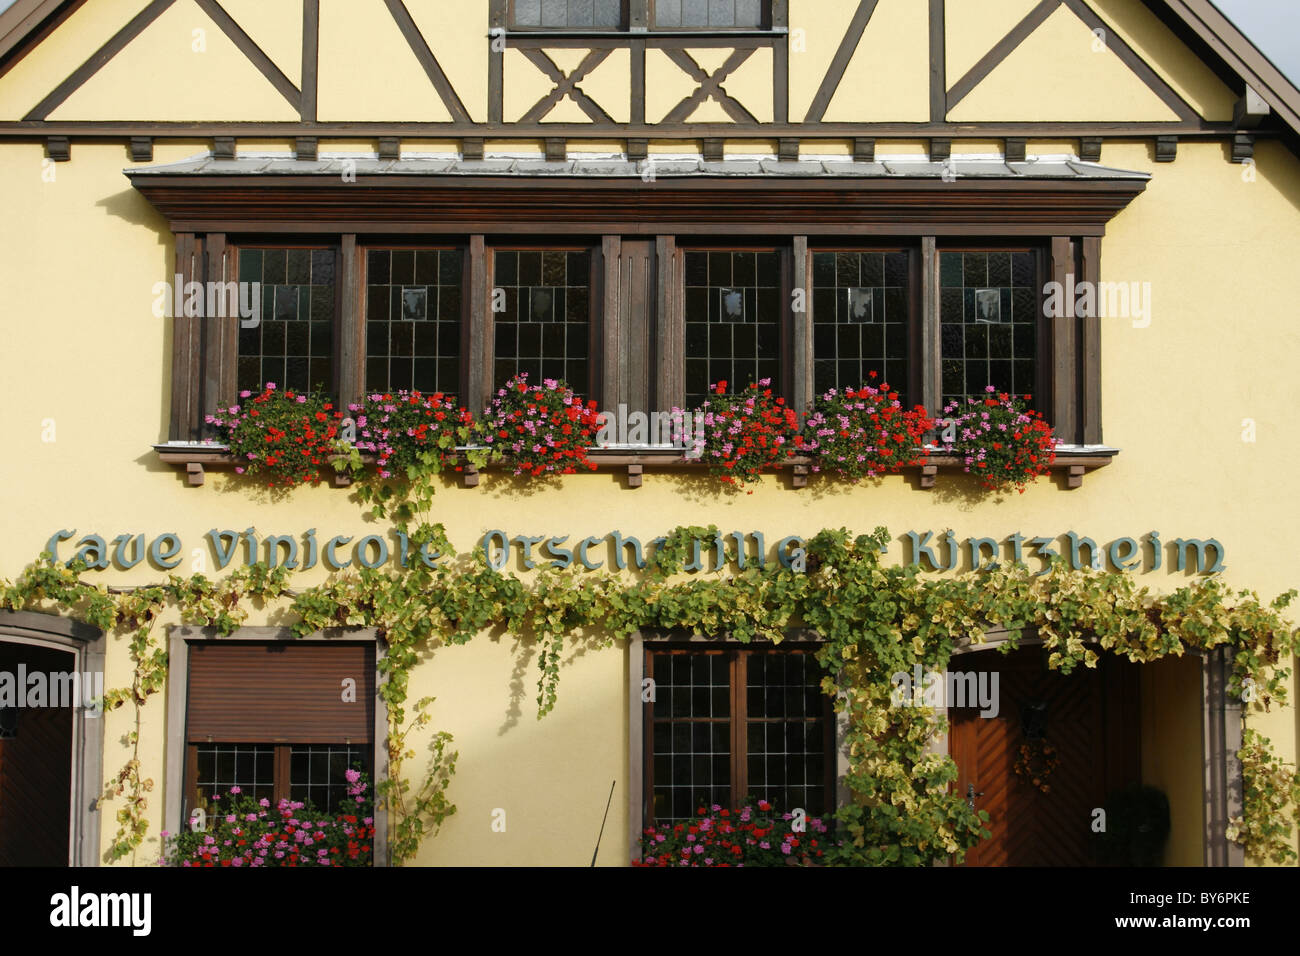 Alsace wine route France timbered building windows flowers architecture Stock Photo